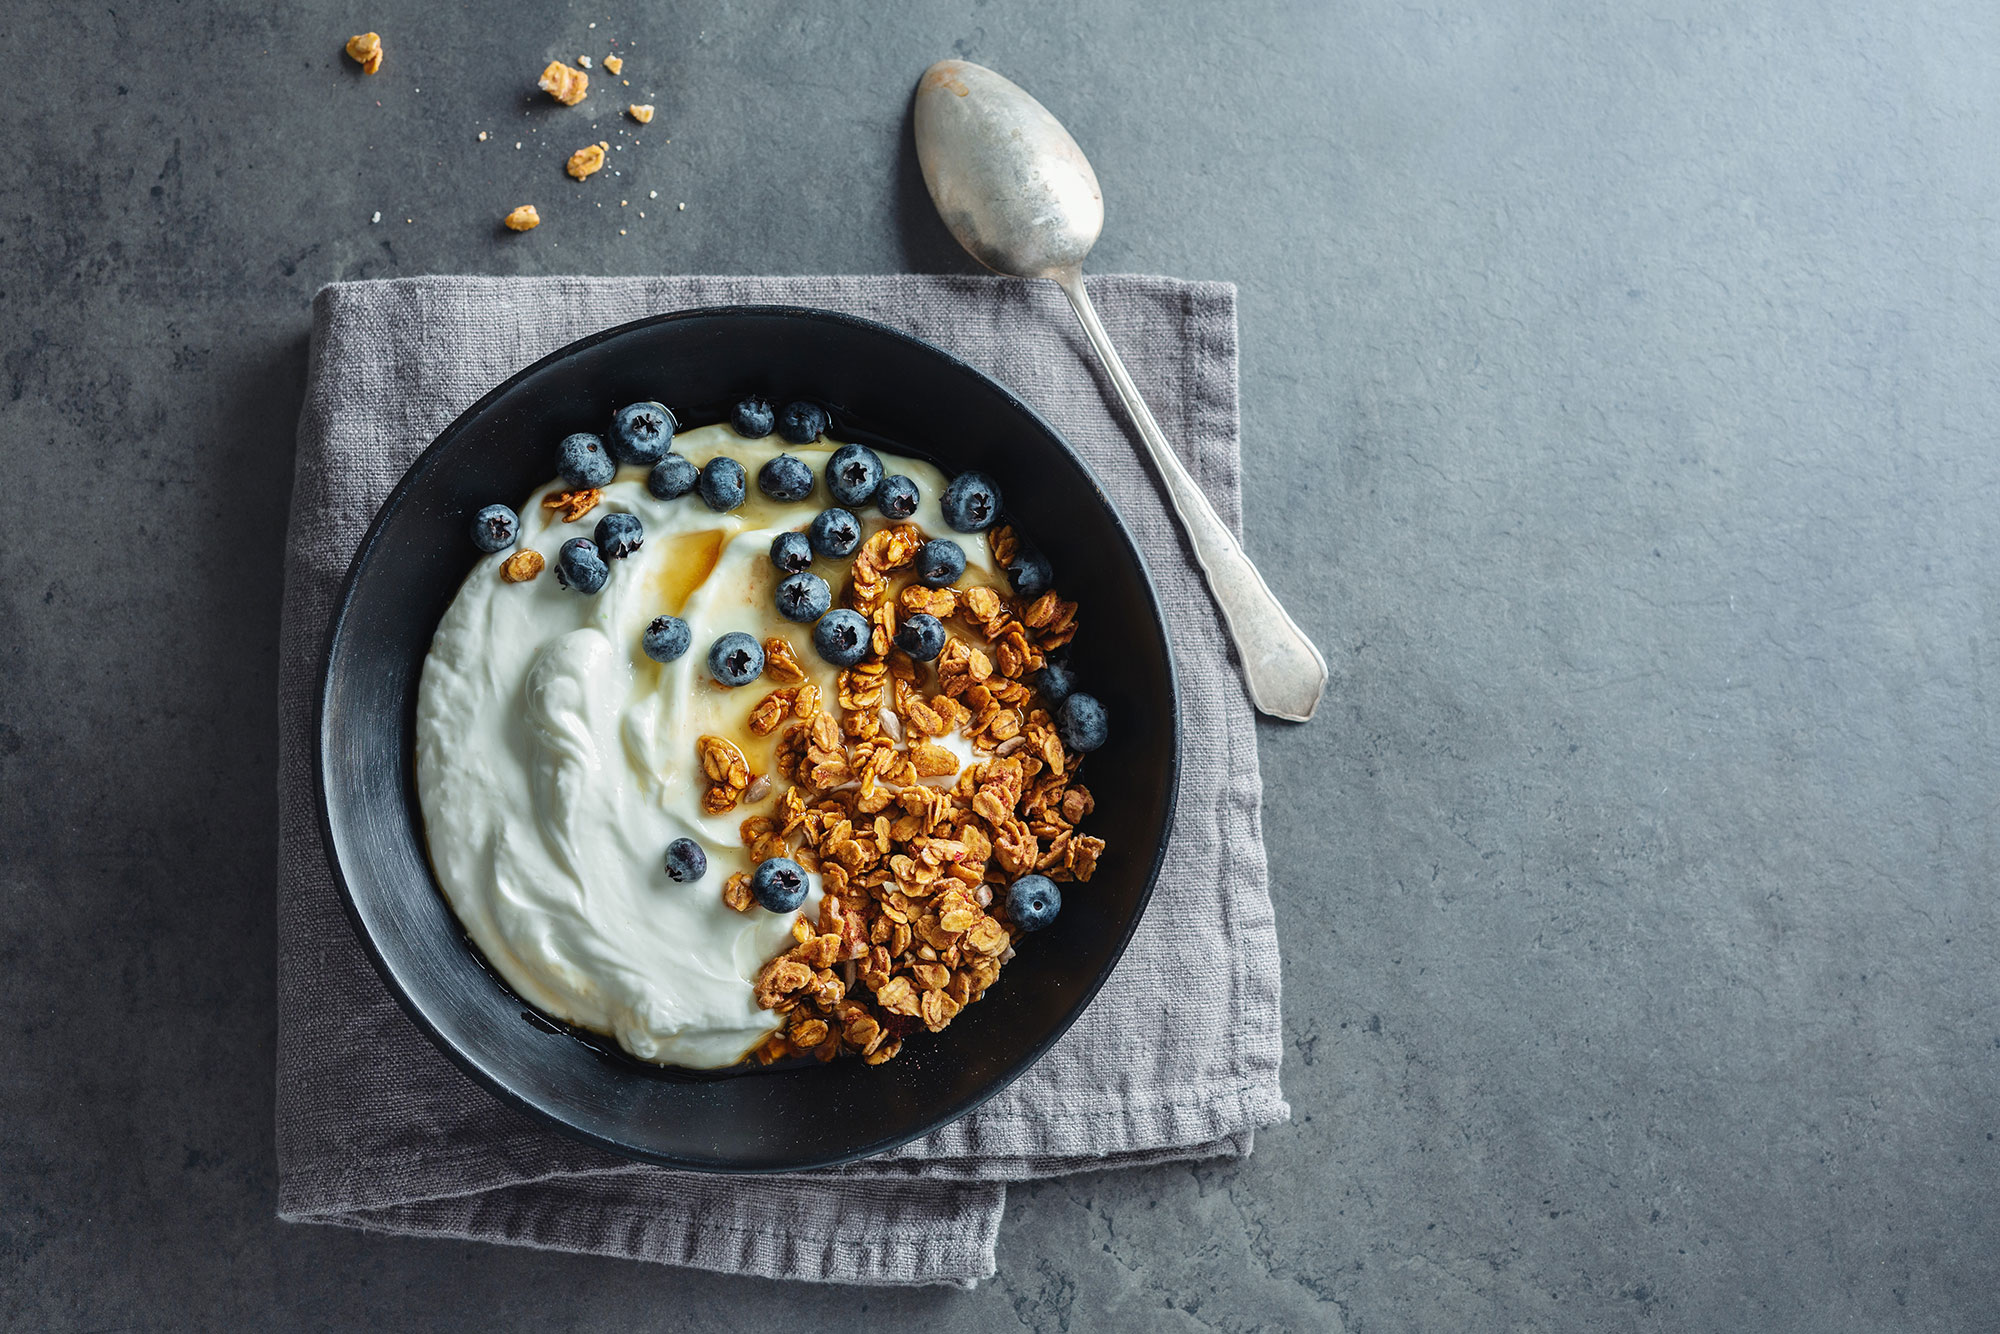 Homemade sous-vide yogurt served with granola and blueberries